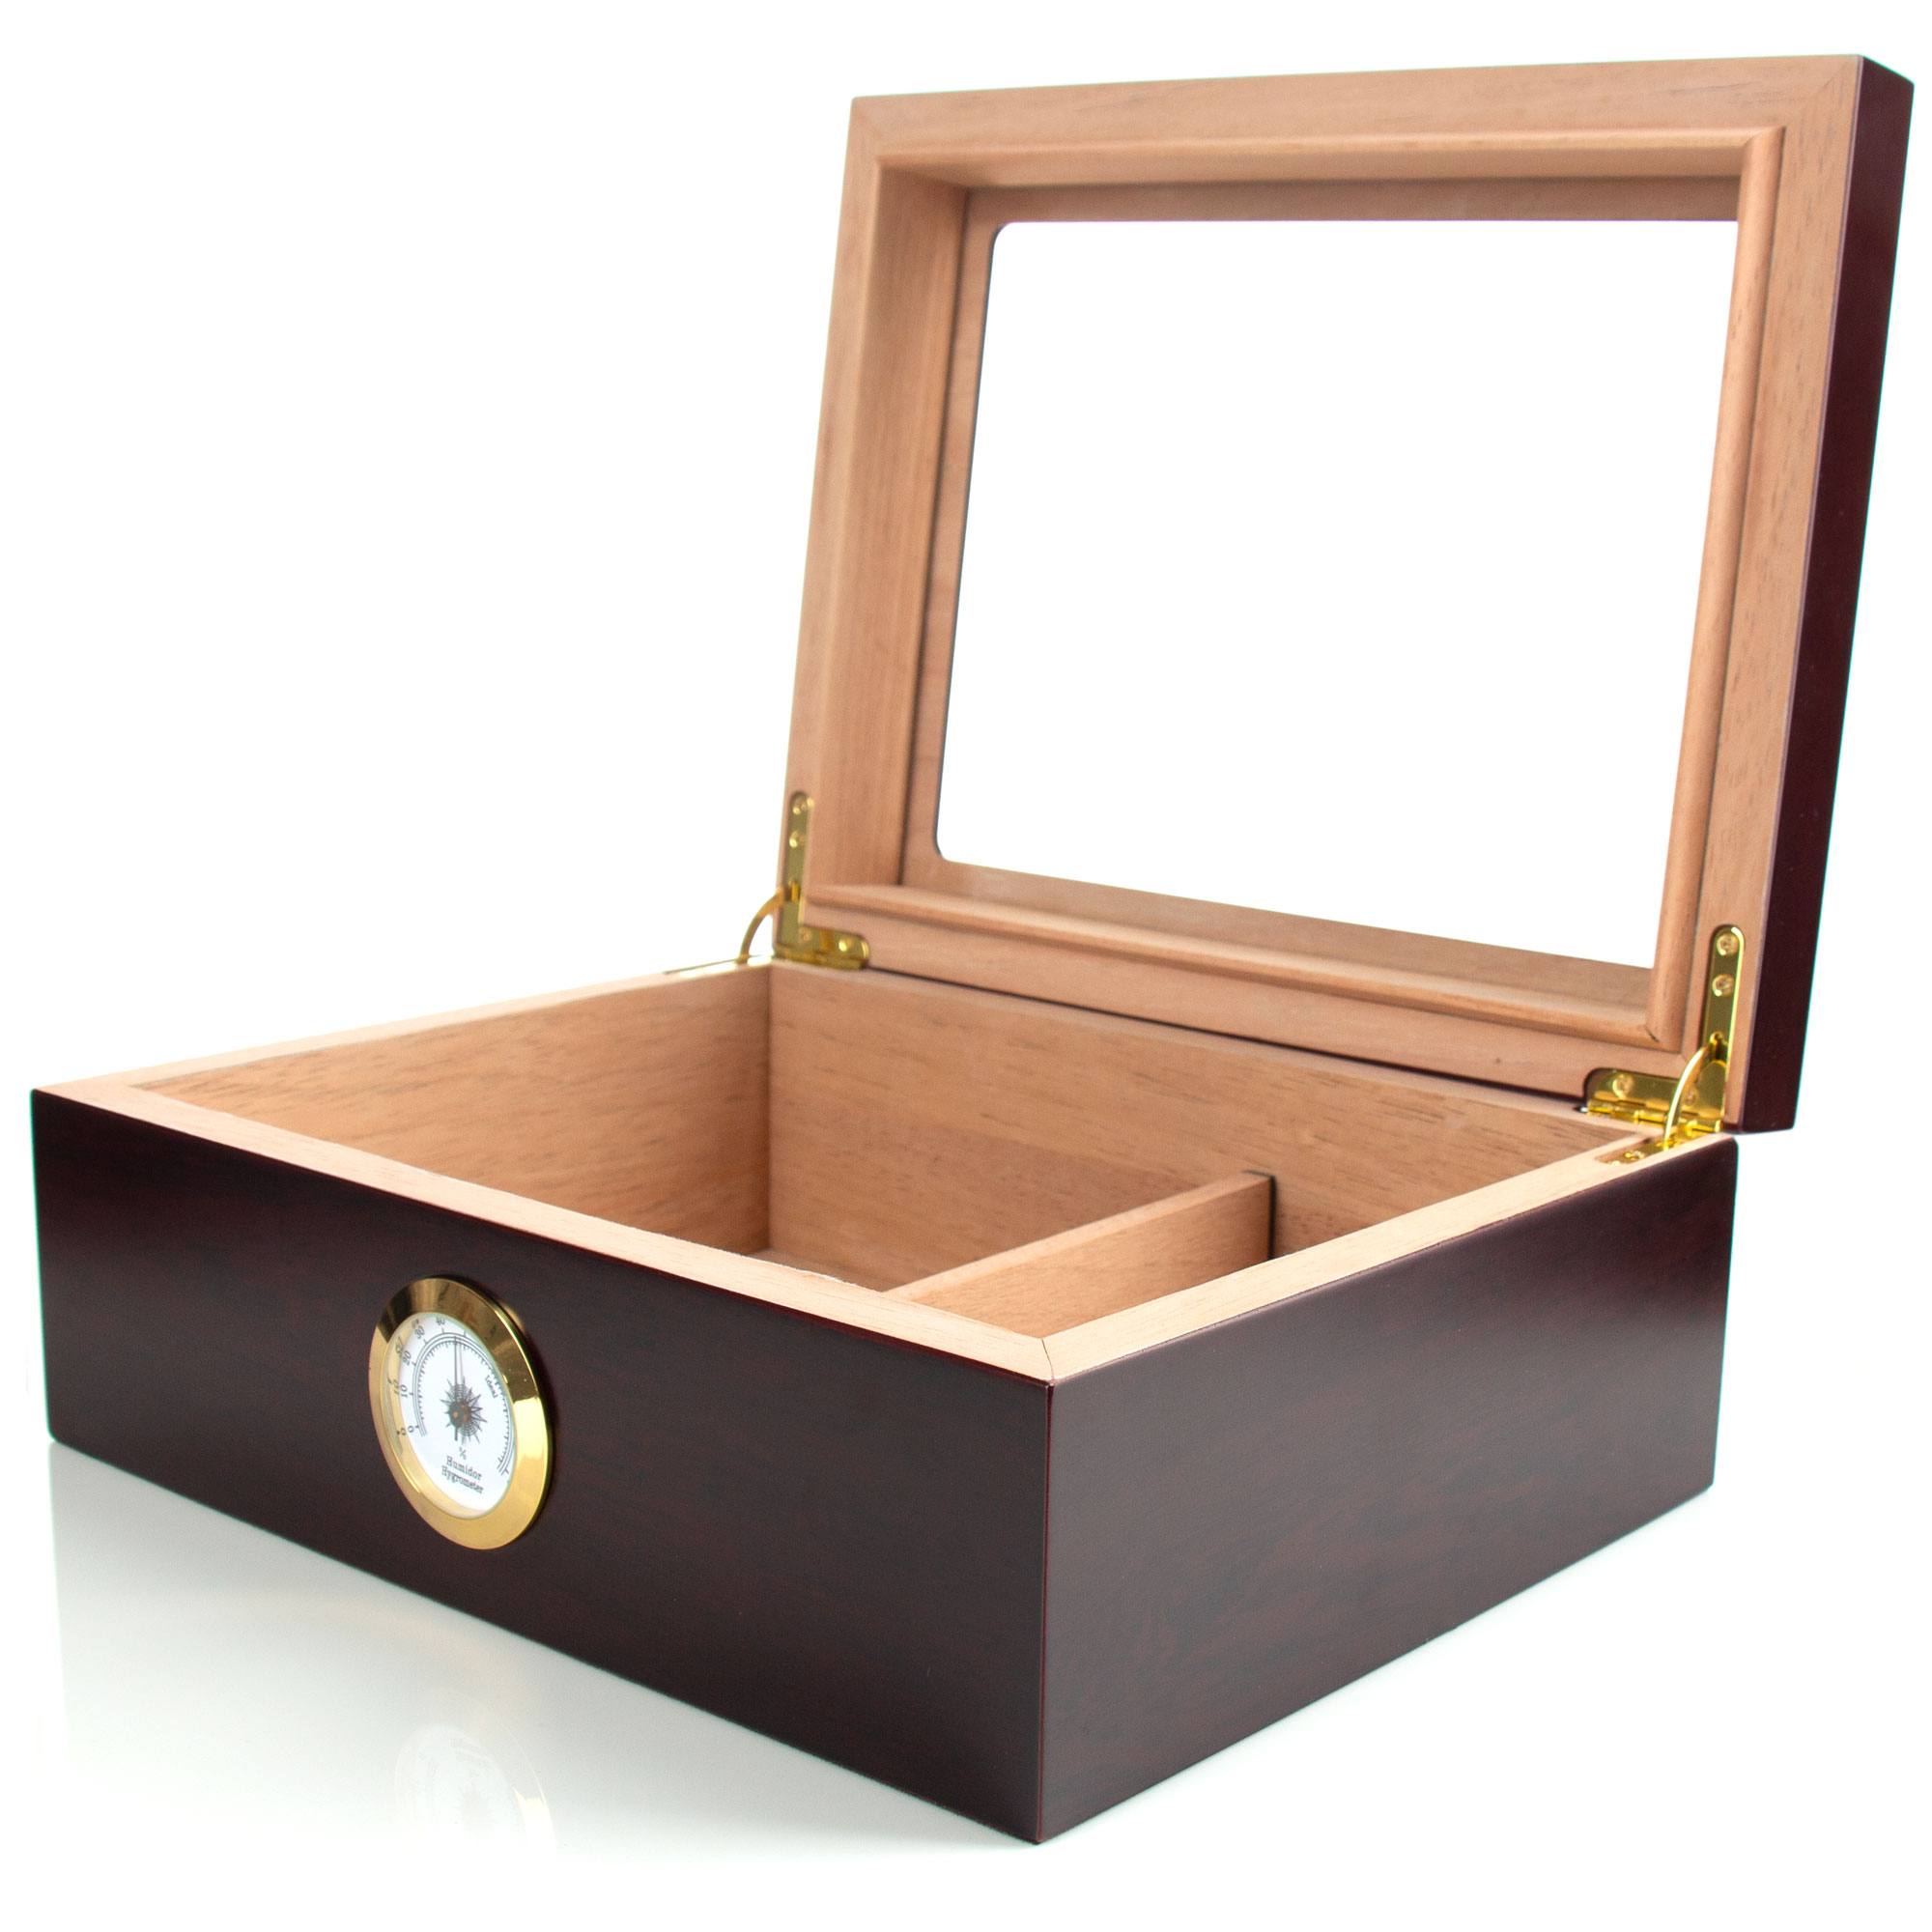 Personalized Cigar Humidor - Engraved Louis Vuitton Flower Logo Design -  Promotional Products - Custom Gifts - Party Favors - Corporate Gifts -  Personalized Gifts